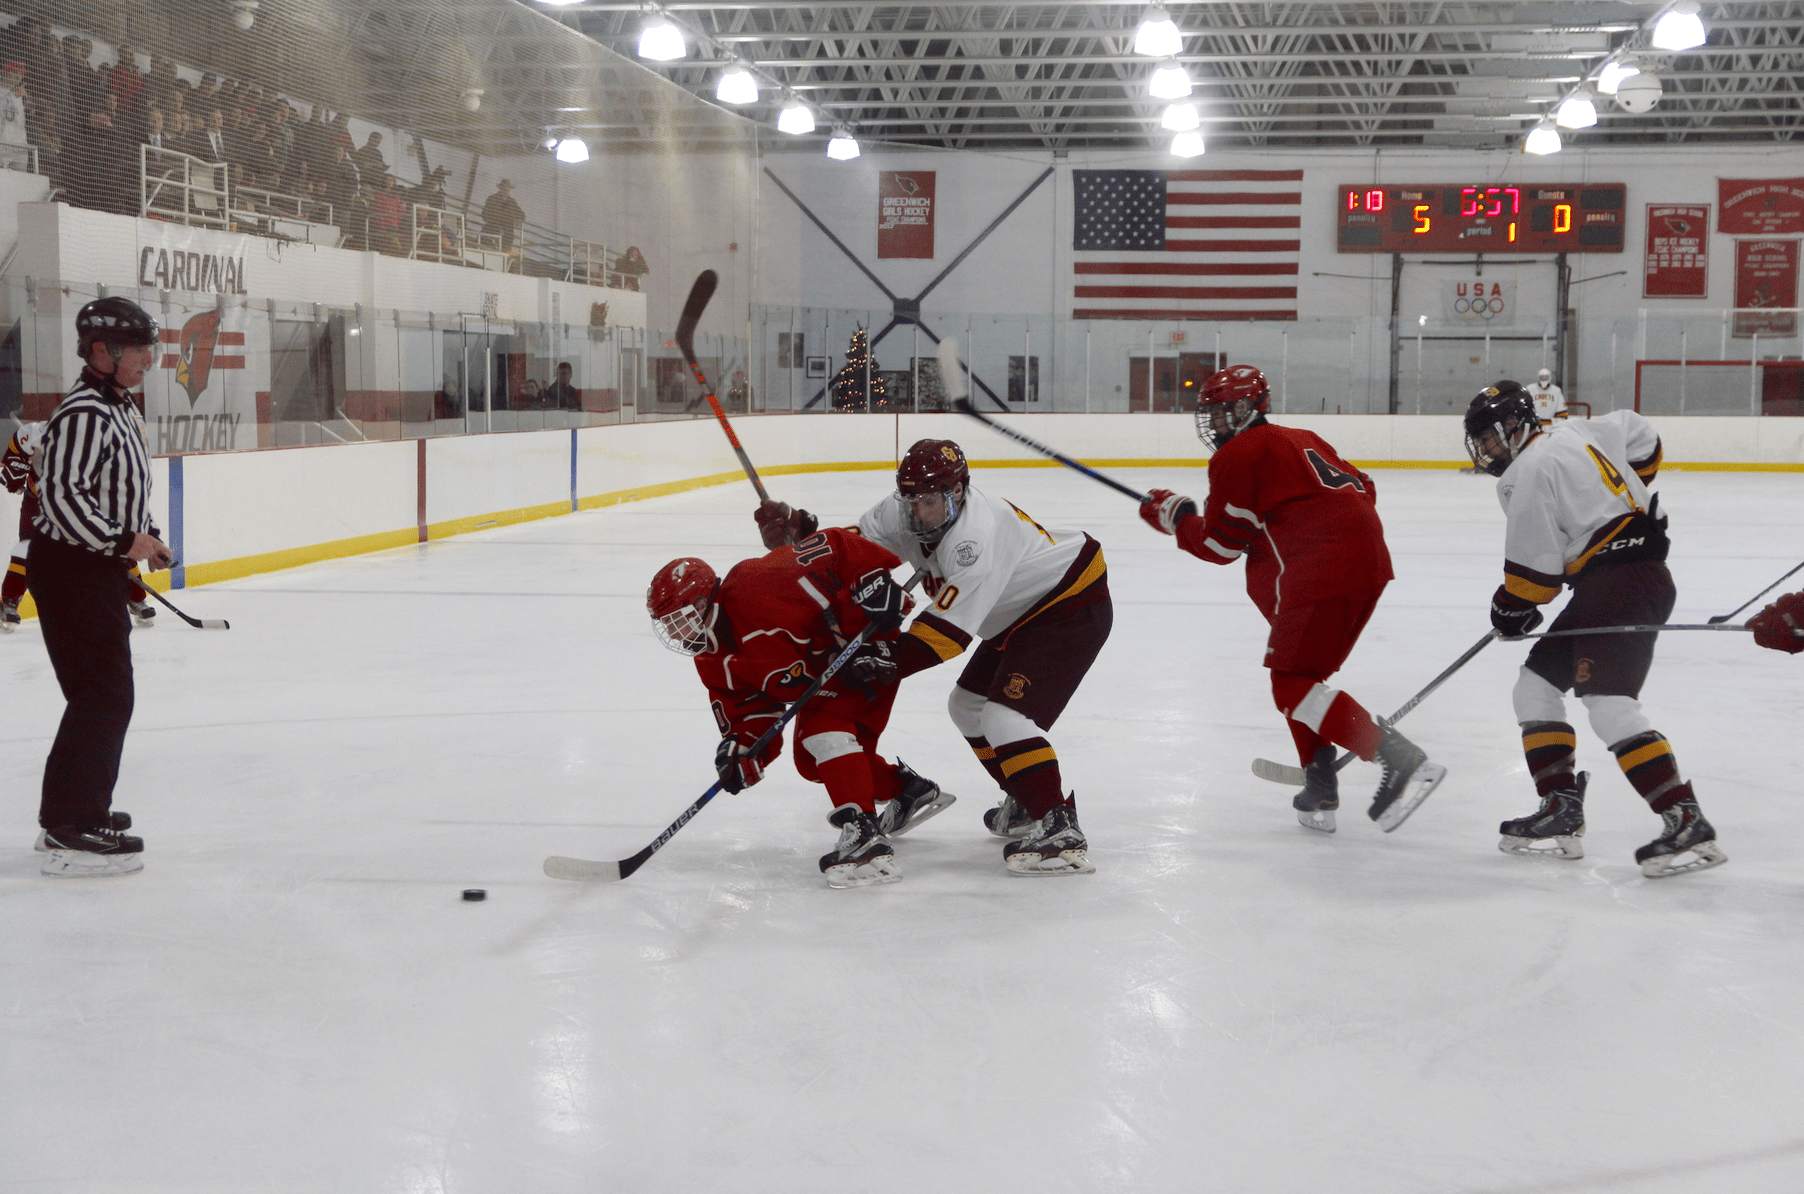 Cardinals had racked up five goals within the first seven minutes of play during their season opener at Hamill Rink, Dec 16, 2017 Photo: Leslie Yager